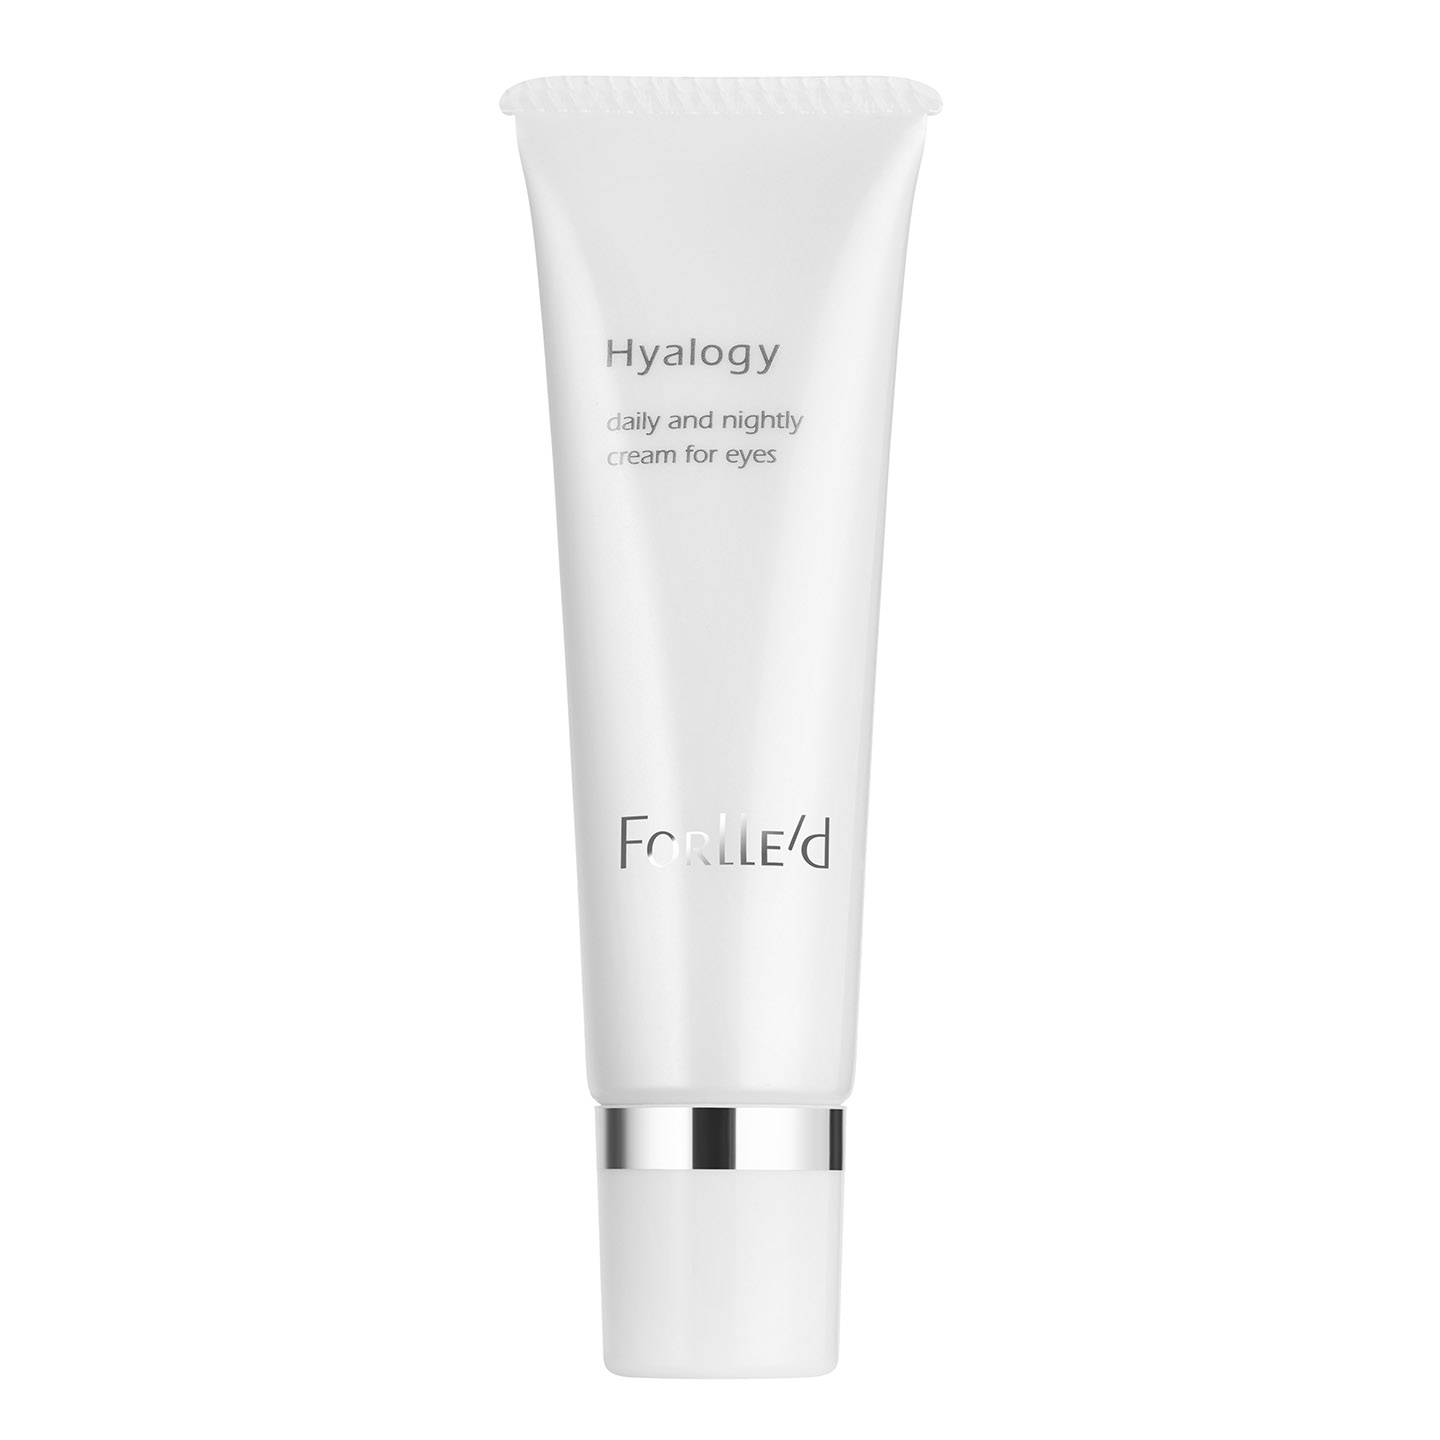 Hyalogy daily and nightly cream for eyes 